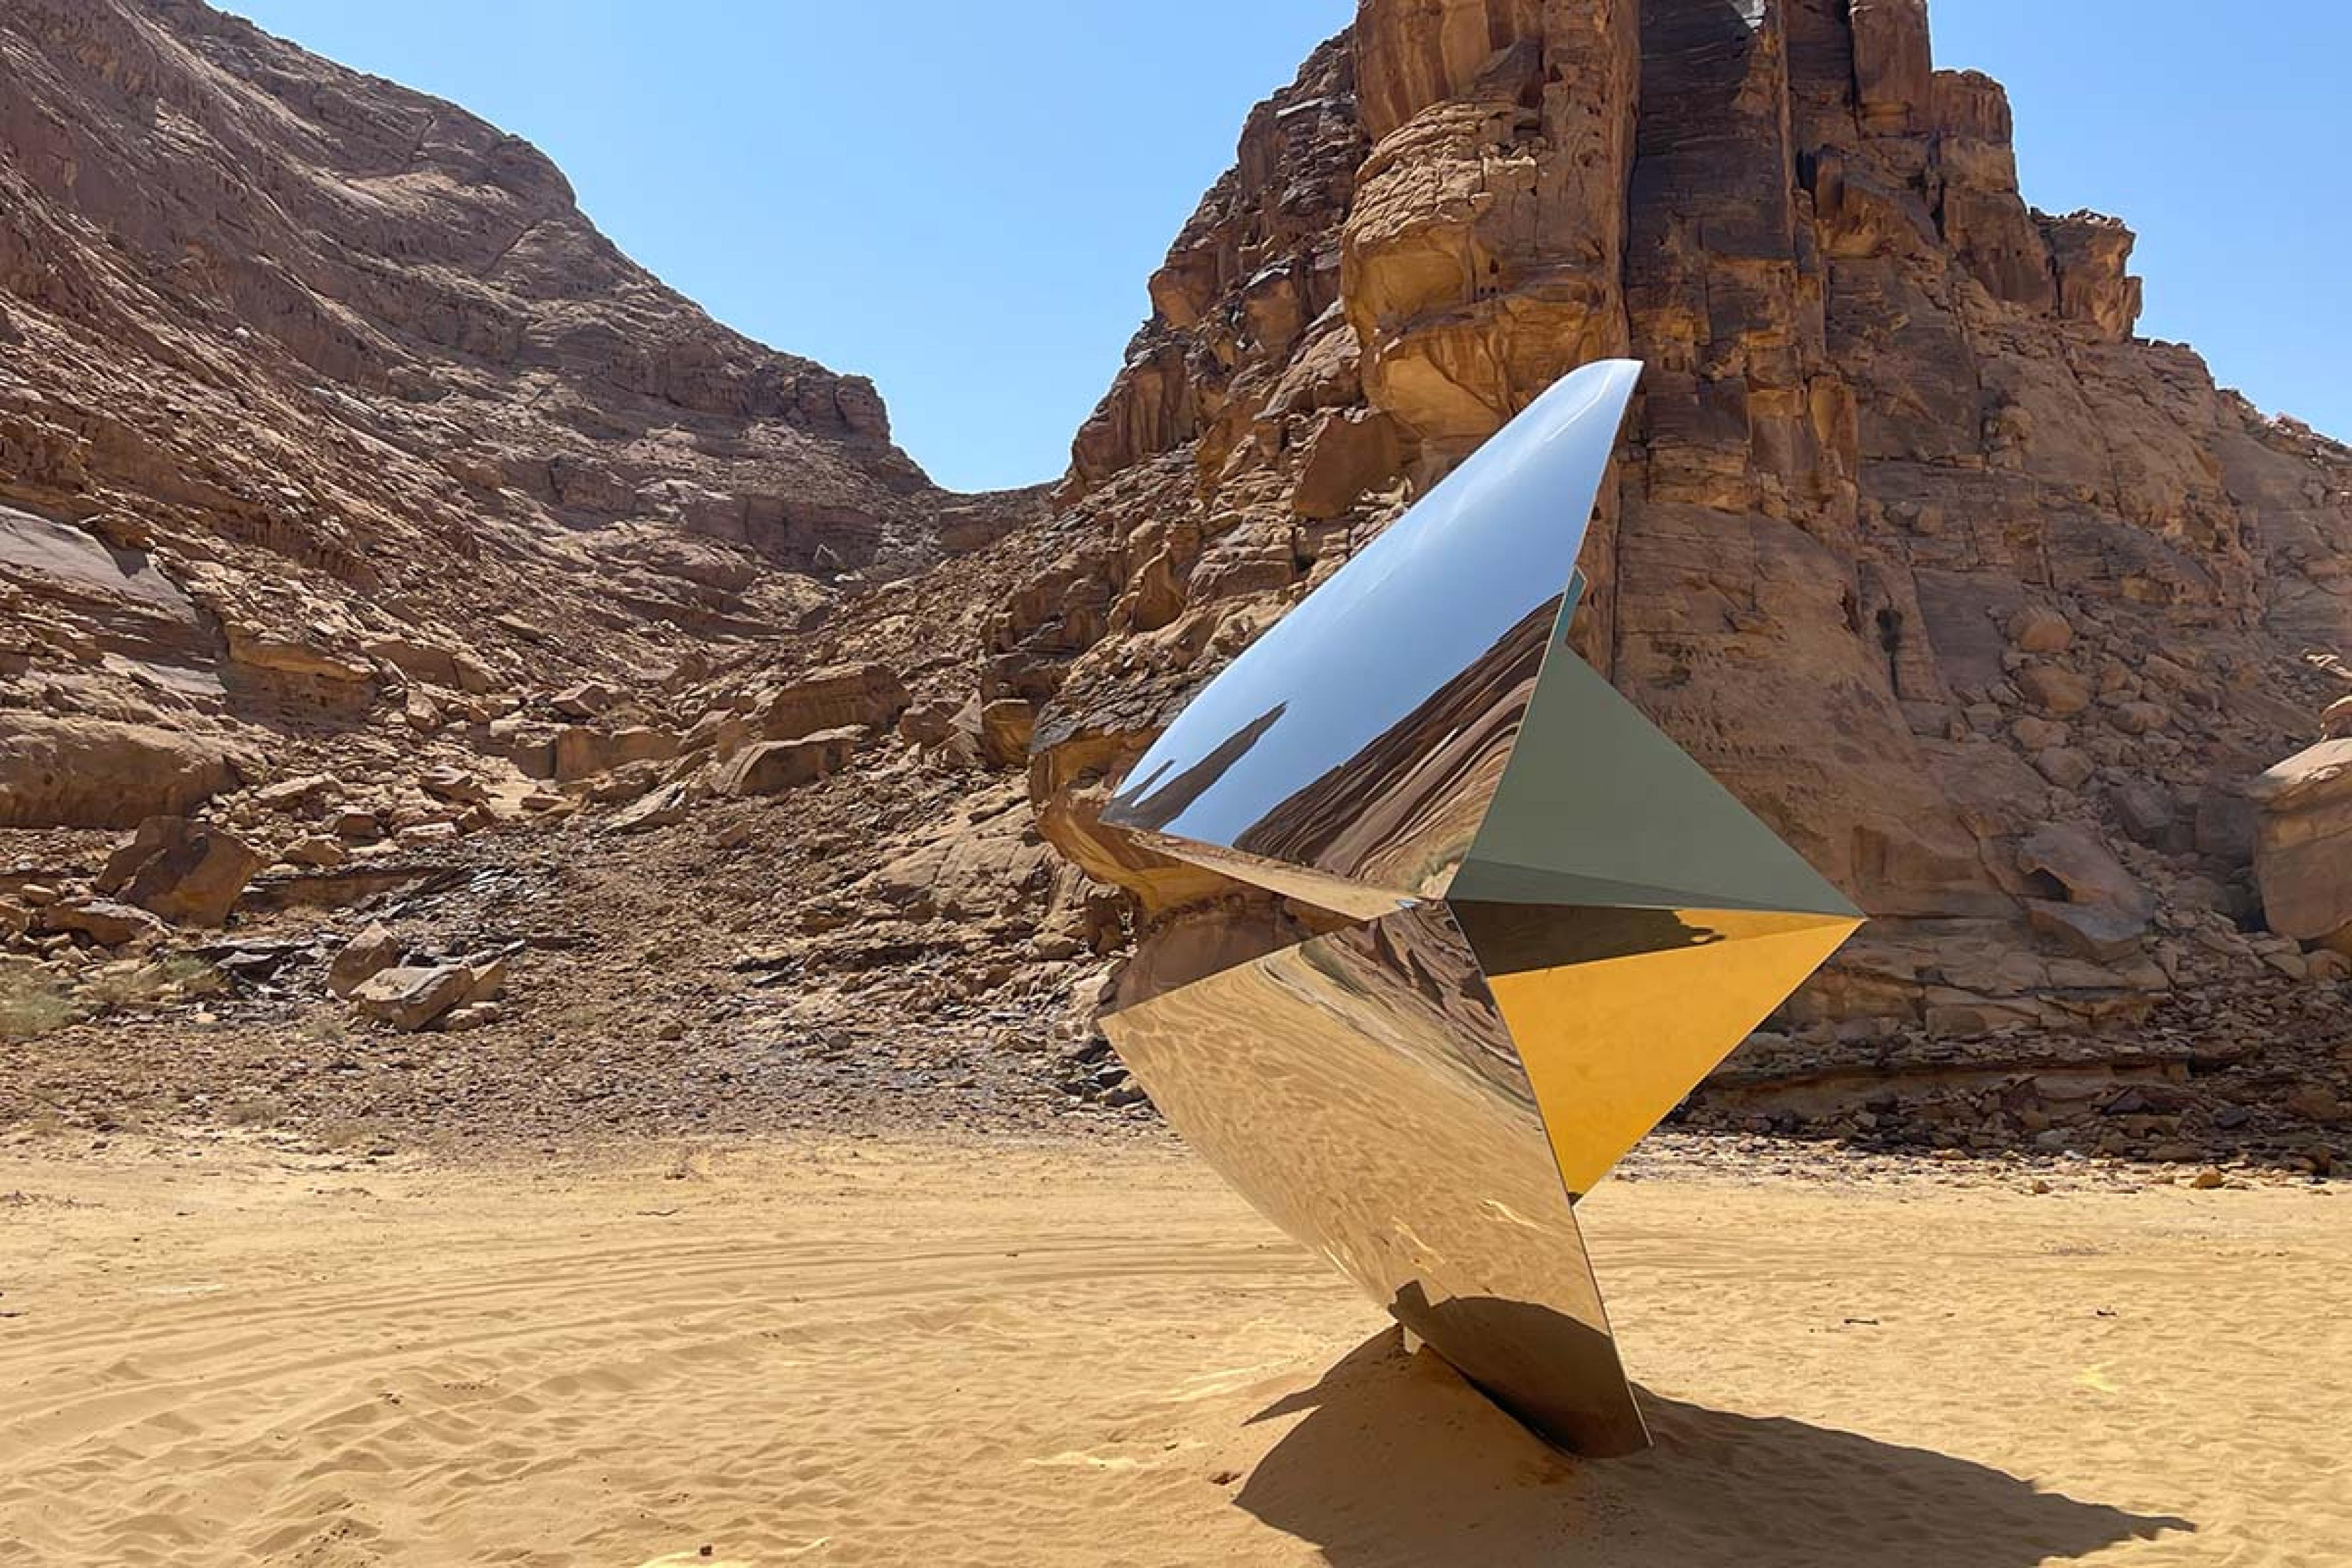 a metallic fortune cookie shaped sculpture in the desert